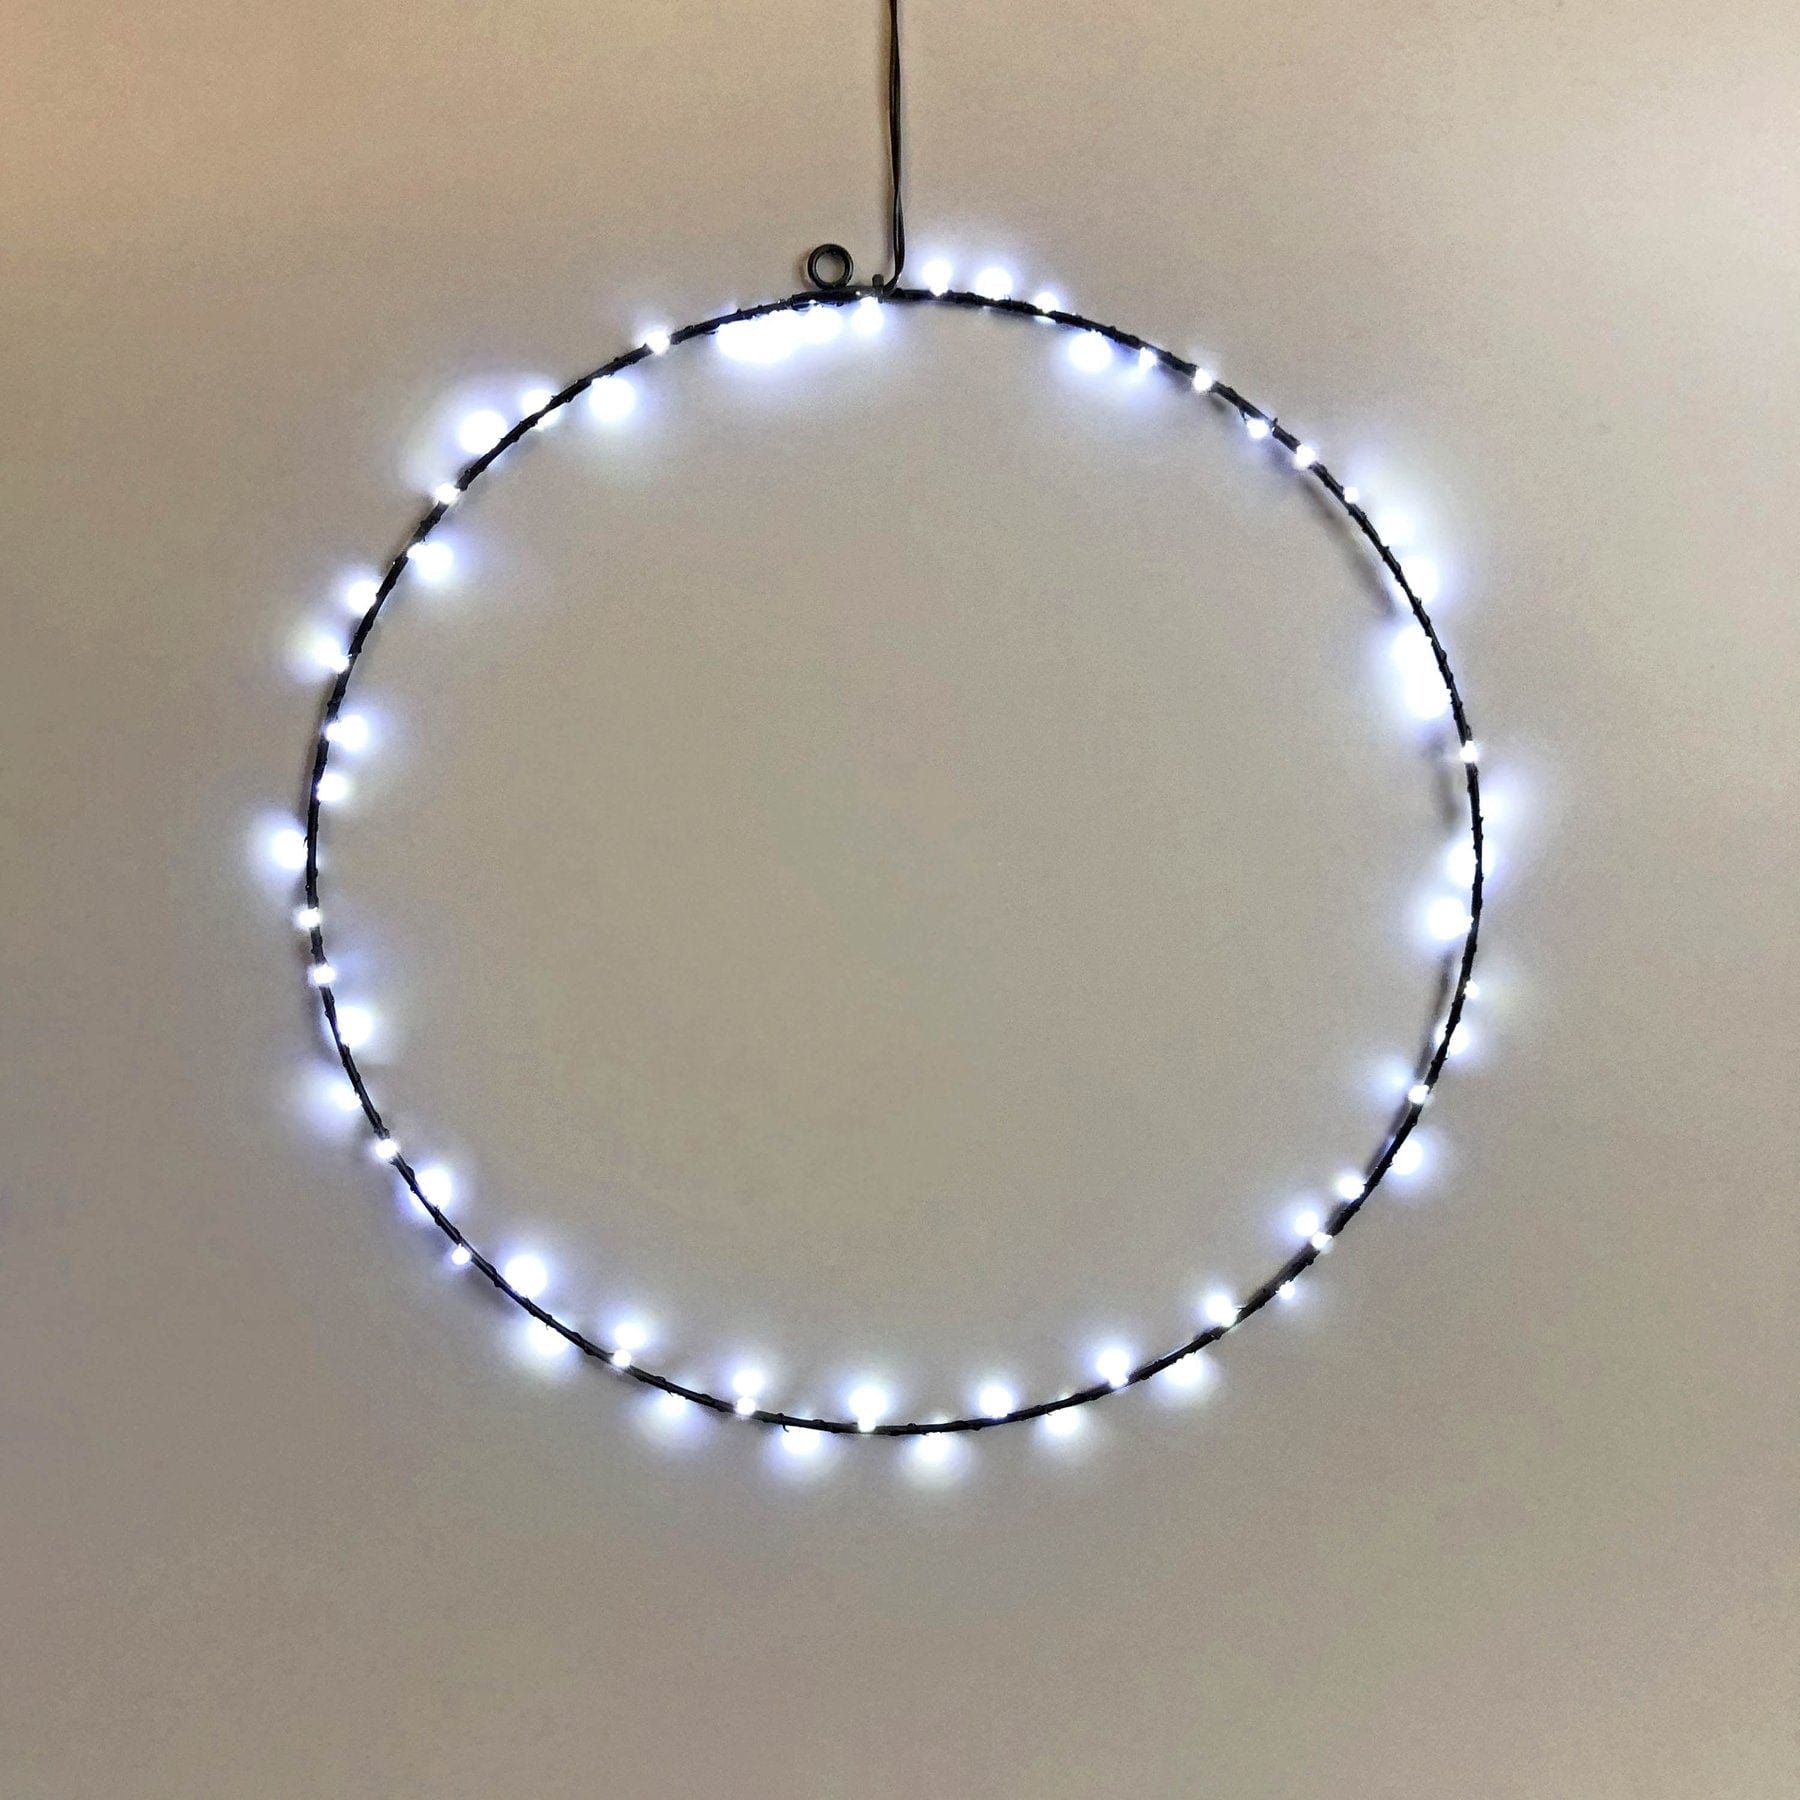 Lexi Lighting Christmas Ceiling&Wall Decoration Hanging Ring with Dual Colour LED - 2 Size Options